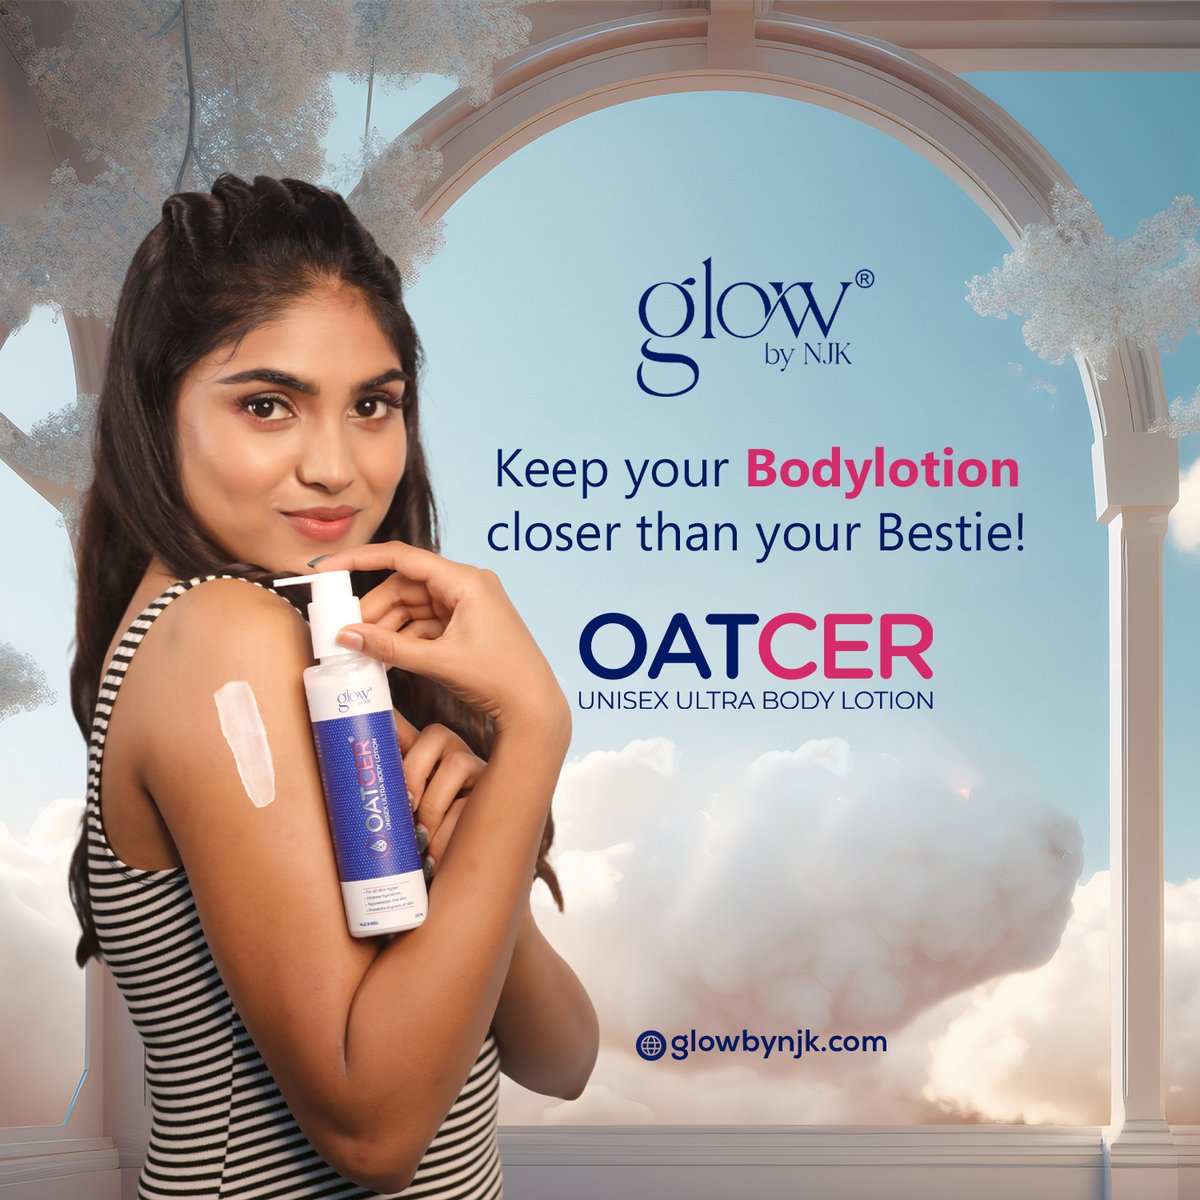 In need of soft, smooth skin? 

Then it’s time to try Glow by NJK’s Oatcer Unisex Ultra Body Lotion. 

Grab the best body lotion here.

Visit us @glowbynjk via bio and pamper your body

#glowbynjk #newproduct #softskin #vegan #crultyfree #parben #bodylotion #bodycare #selfcare